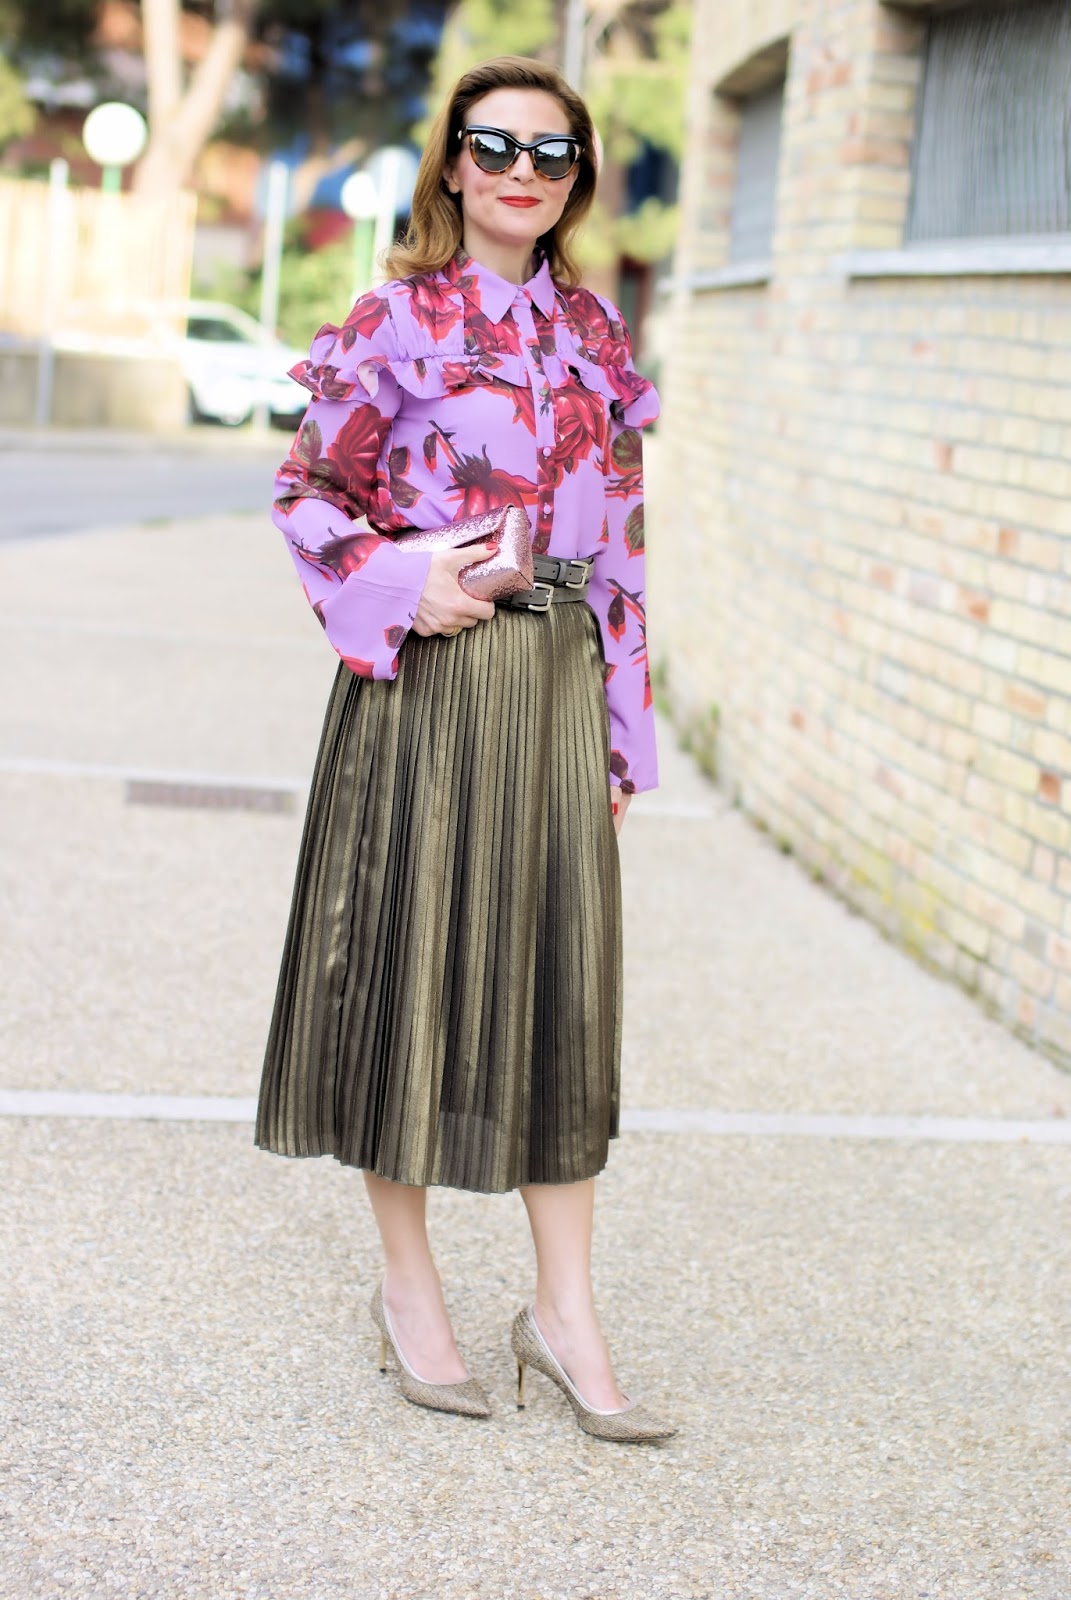 Golden pleated skirt: Spring daytime outfit on Fashion and Cookies fashion blog, fashion blogger style